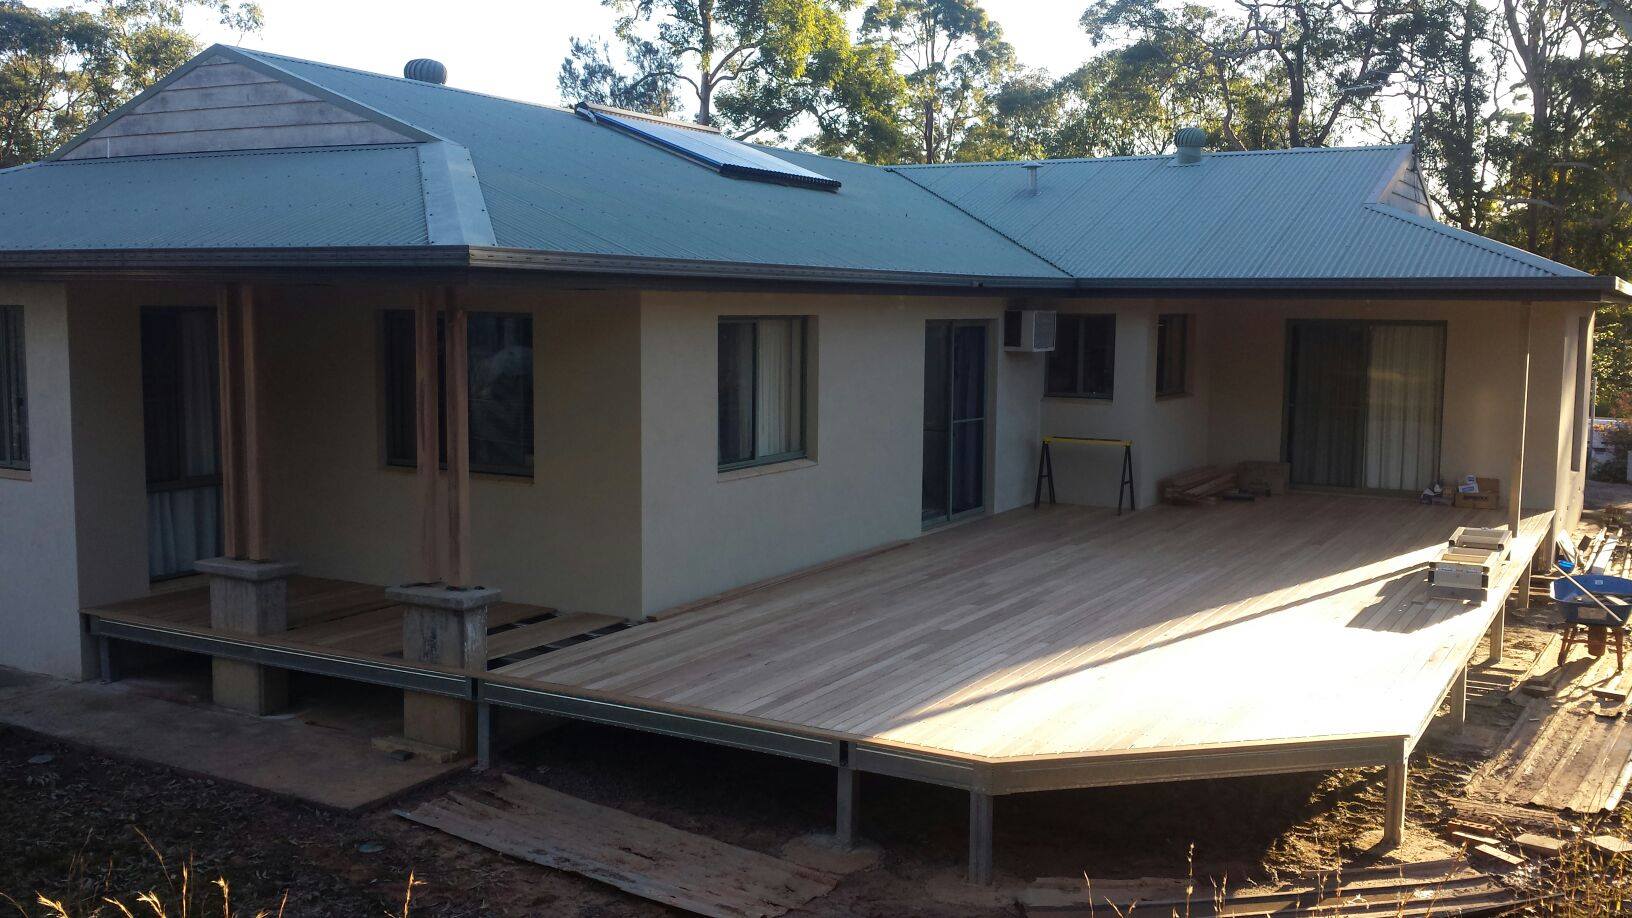 Decking boards down on Boxspan steel bearers and joists to increase outdoor living space for this existing house